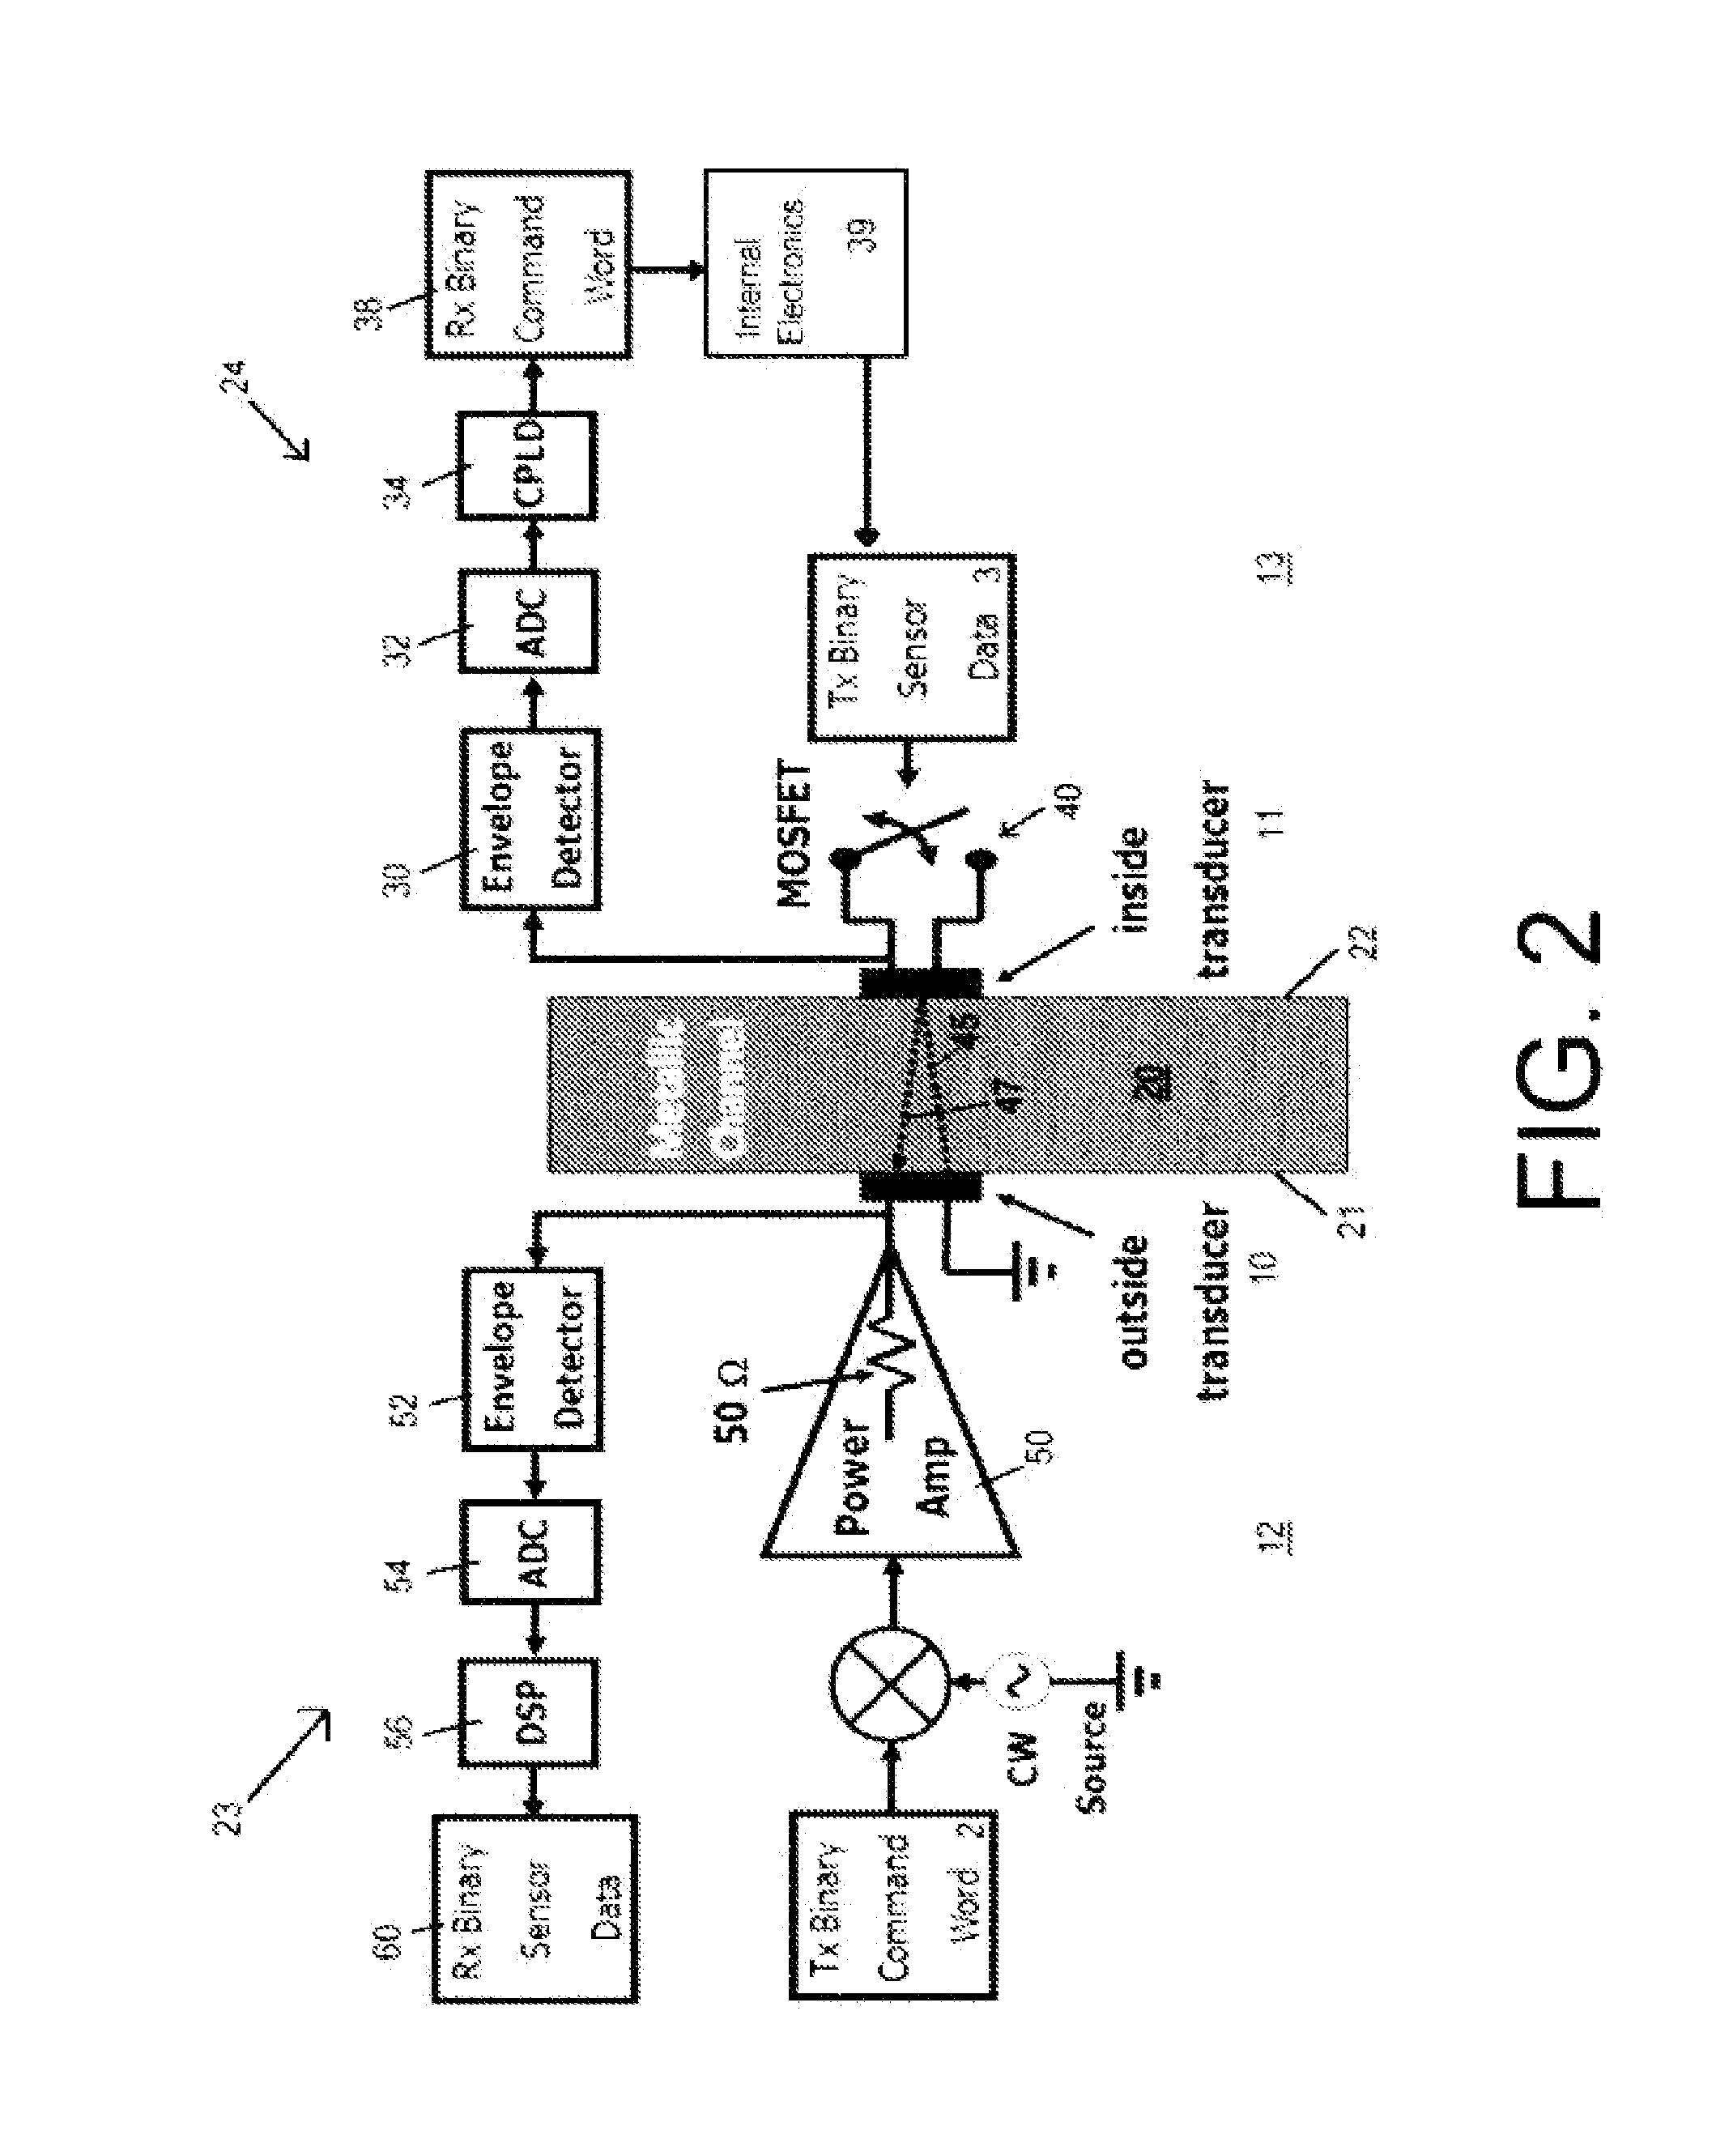 Full-duplex ultrasonic through-wall communication and power delivery system with frequency tracking